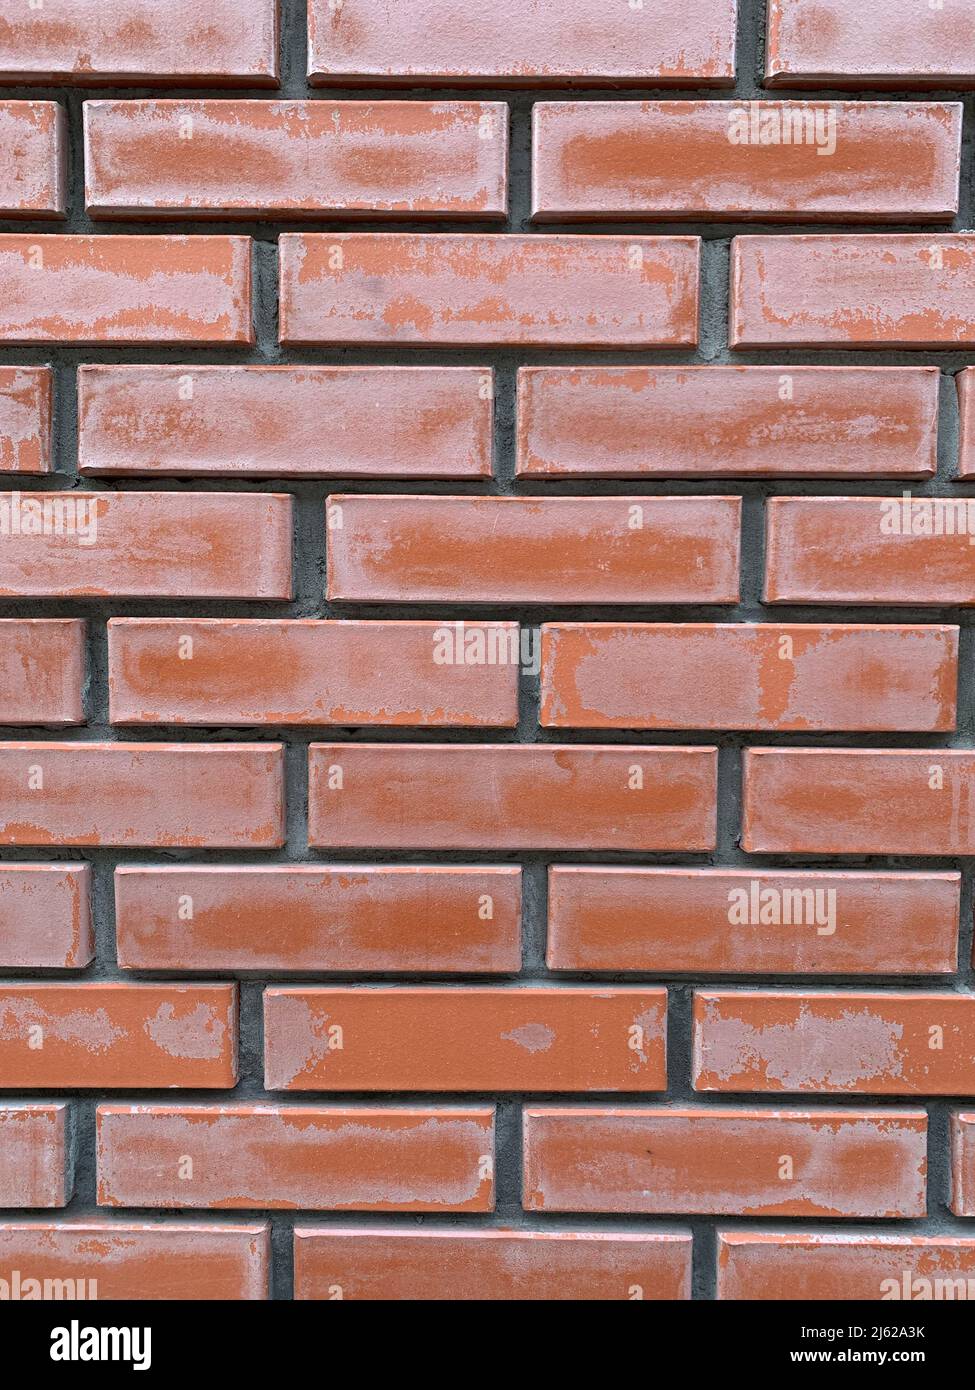 Wall with red bricks. Old brick wall background. grunge brick background texture Stock Photo